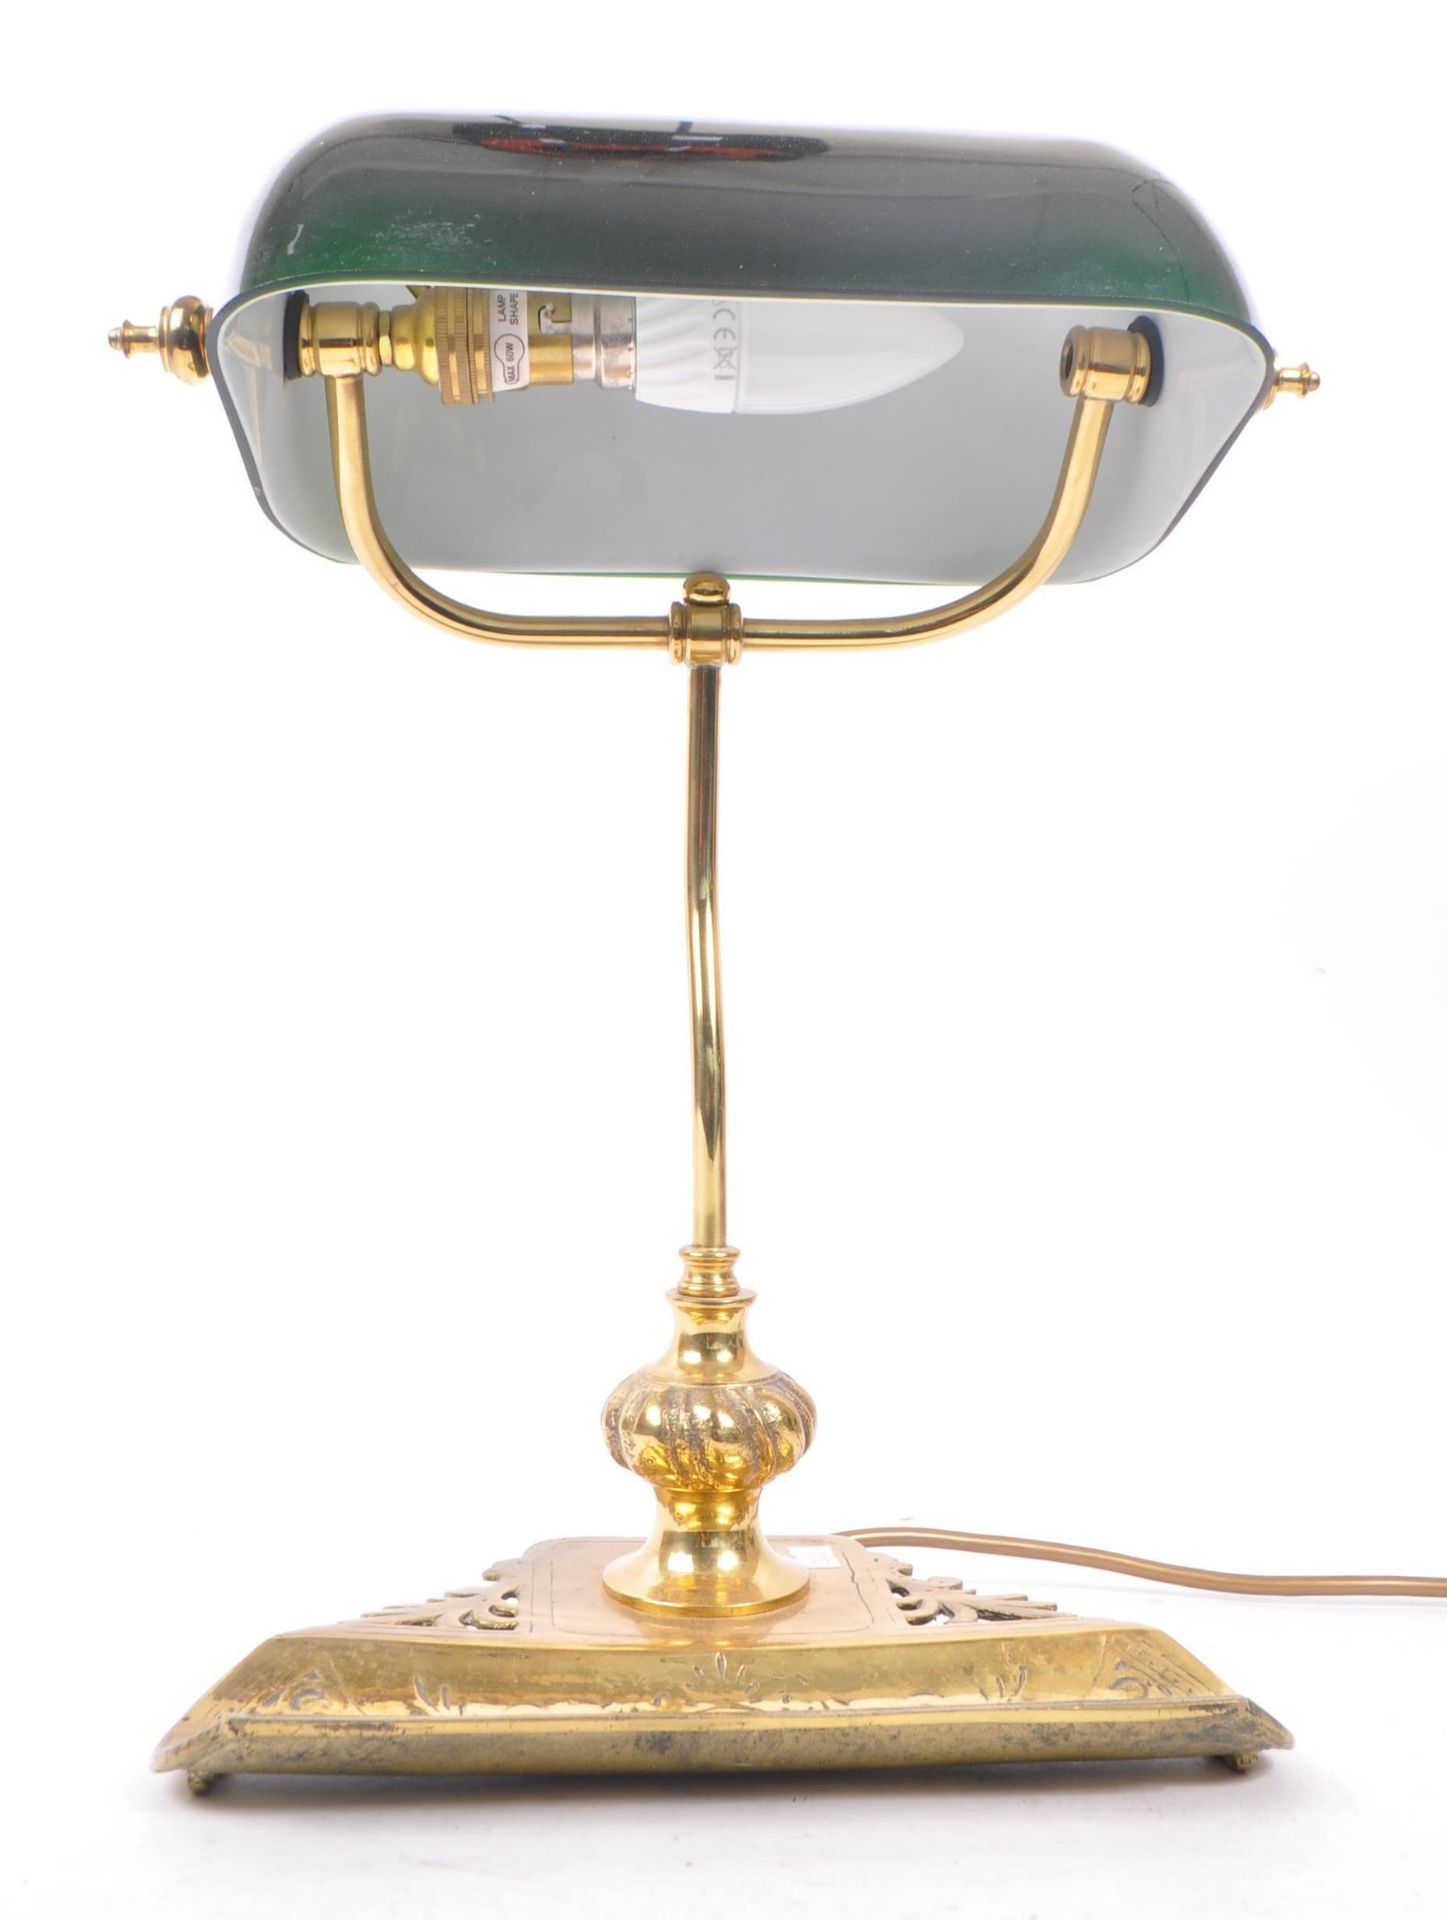 20TH CENTURY DESKTOP BANKERS LIGHT WITH GREEN SHADE - Image 6 of 6